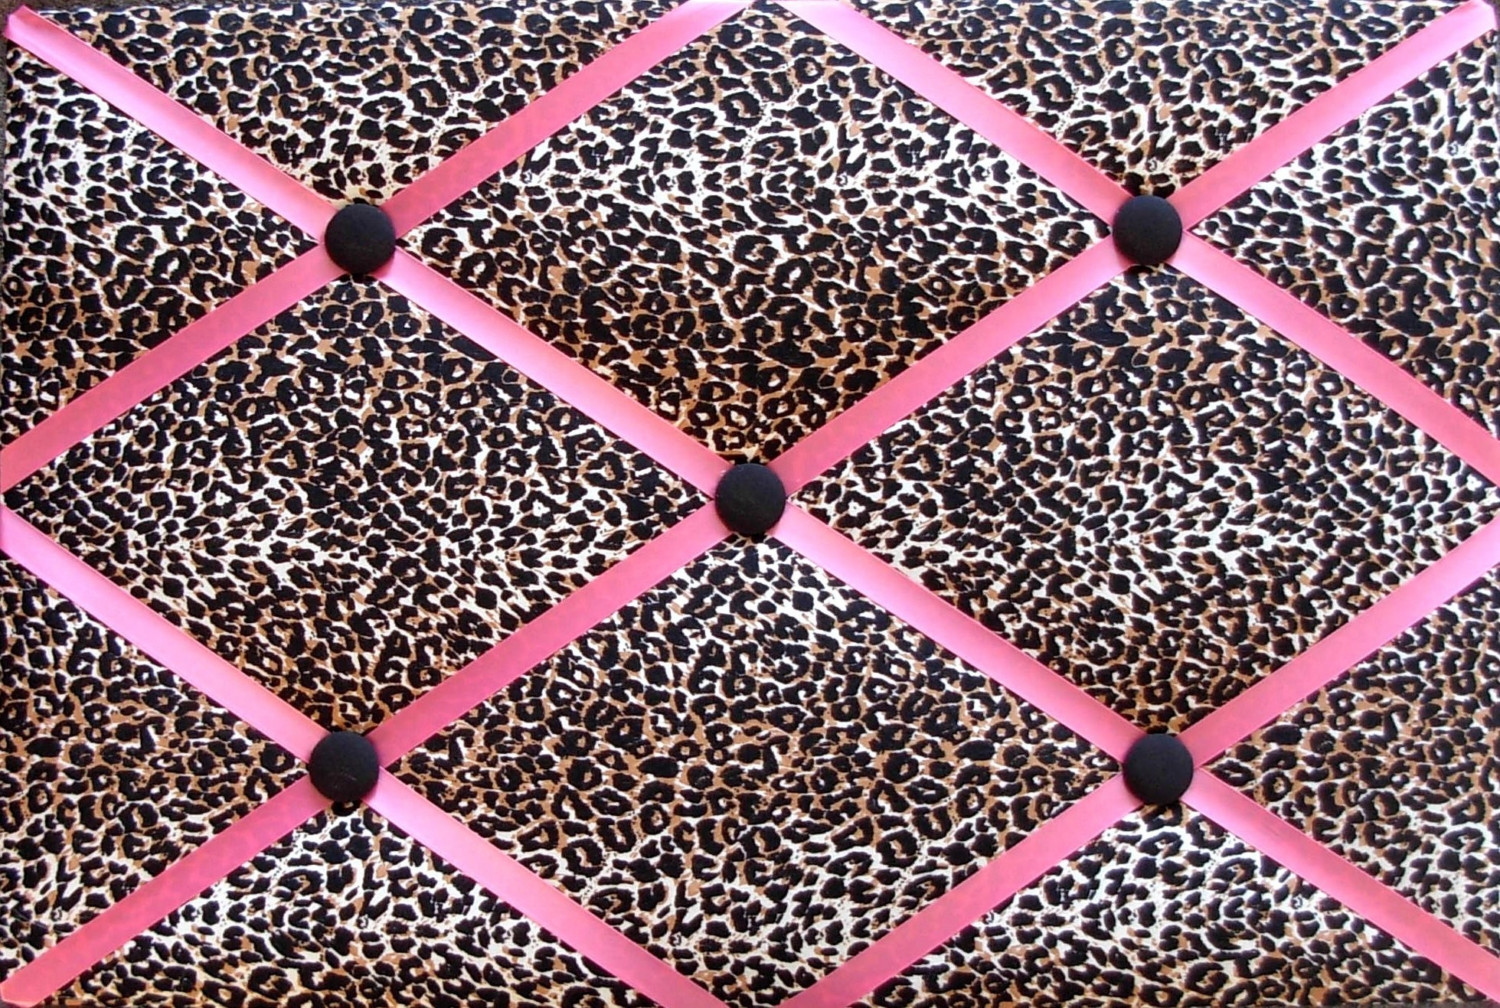 Sassy Cheetah Leopard Memo Board W Hot Pink Satin And Black Buttons